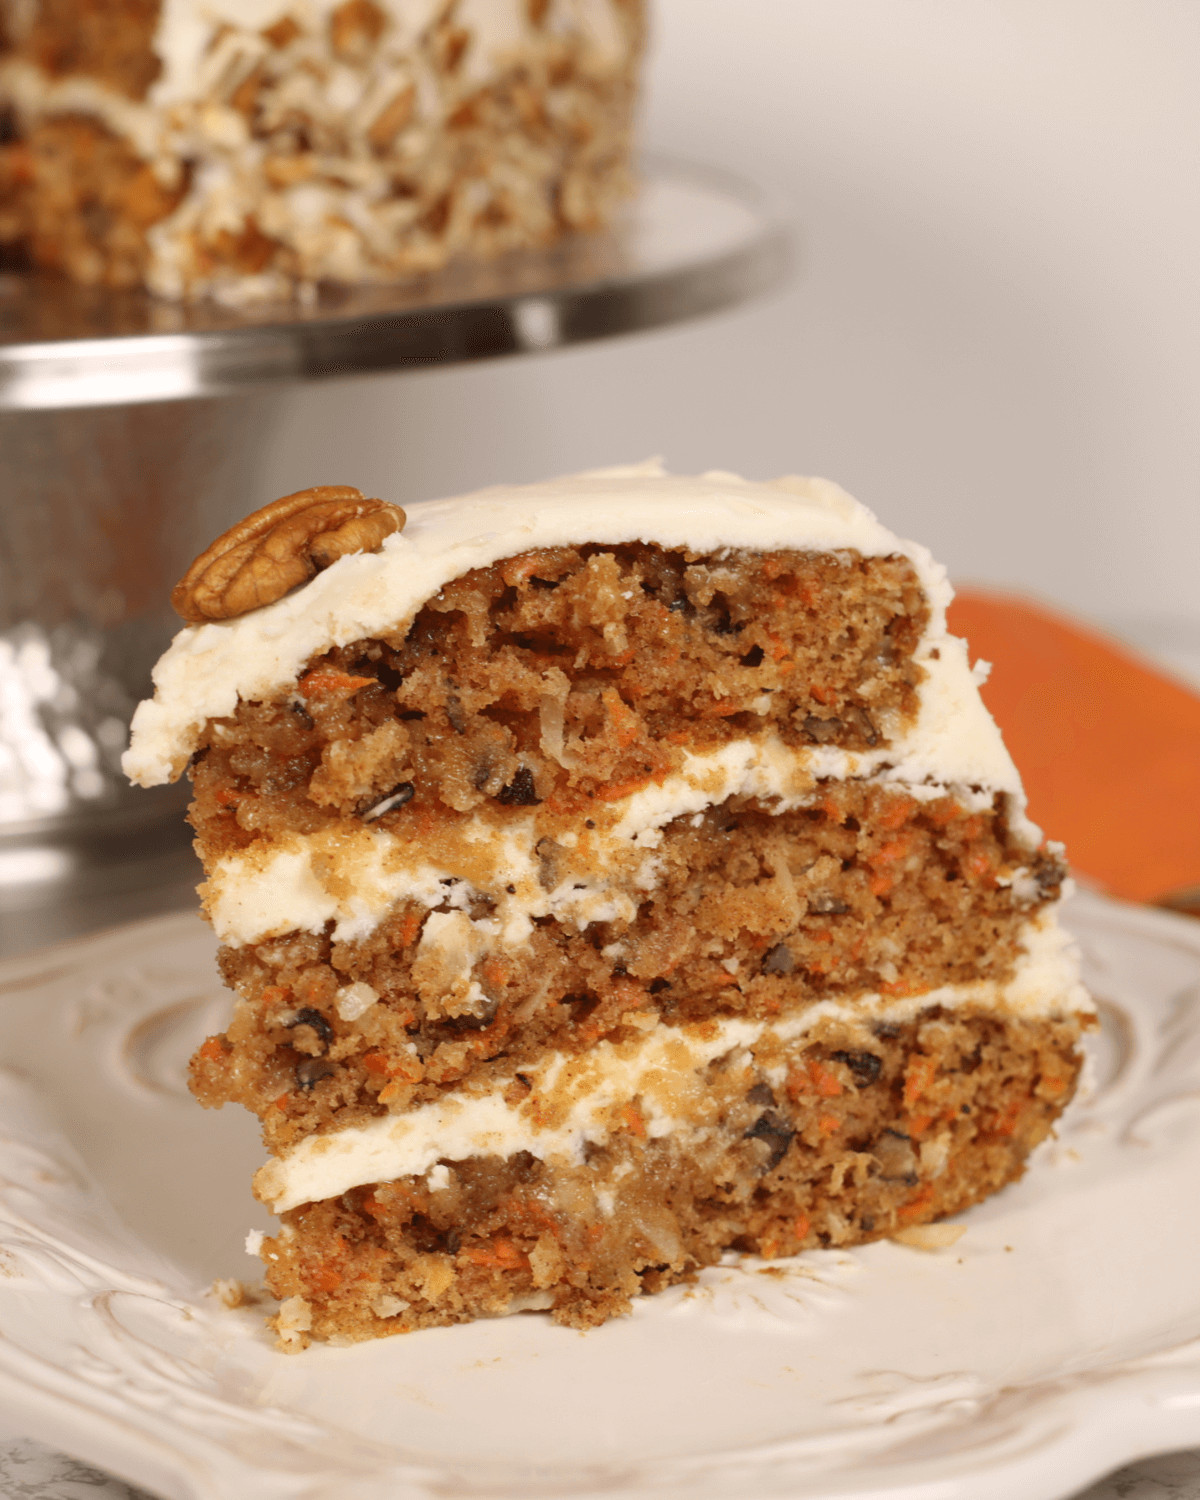 A slice of carrot cake with pineapple, coconut, and cream cheese frosting and a pecan on top, displayed on a white plate.